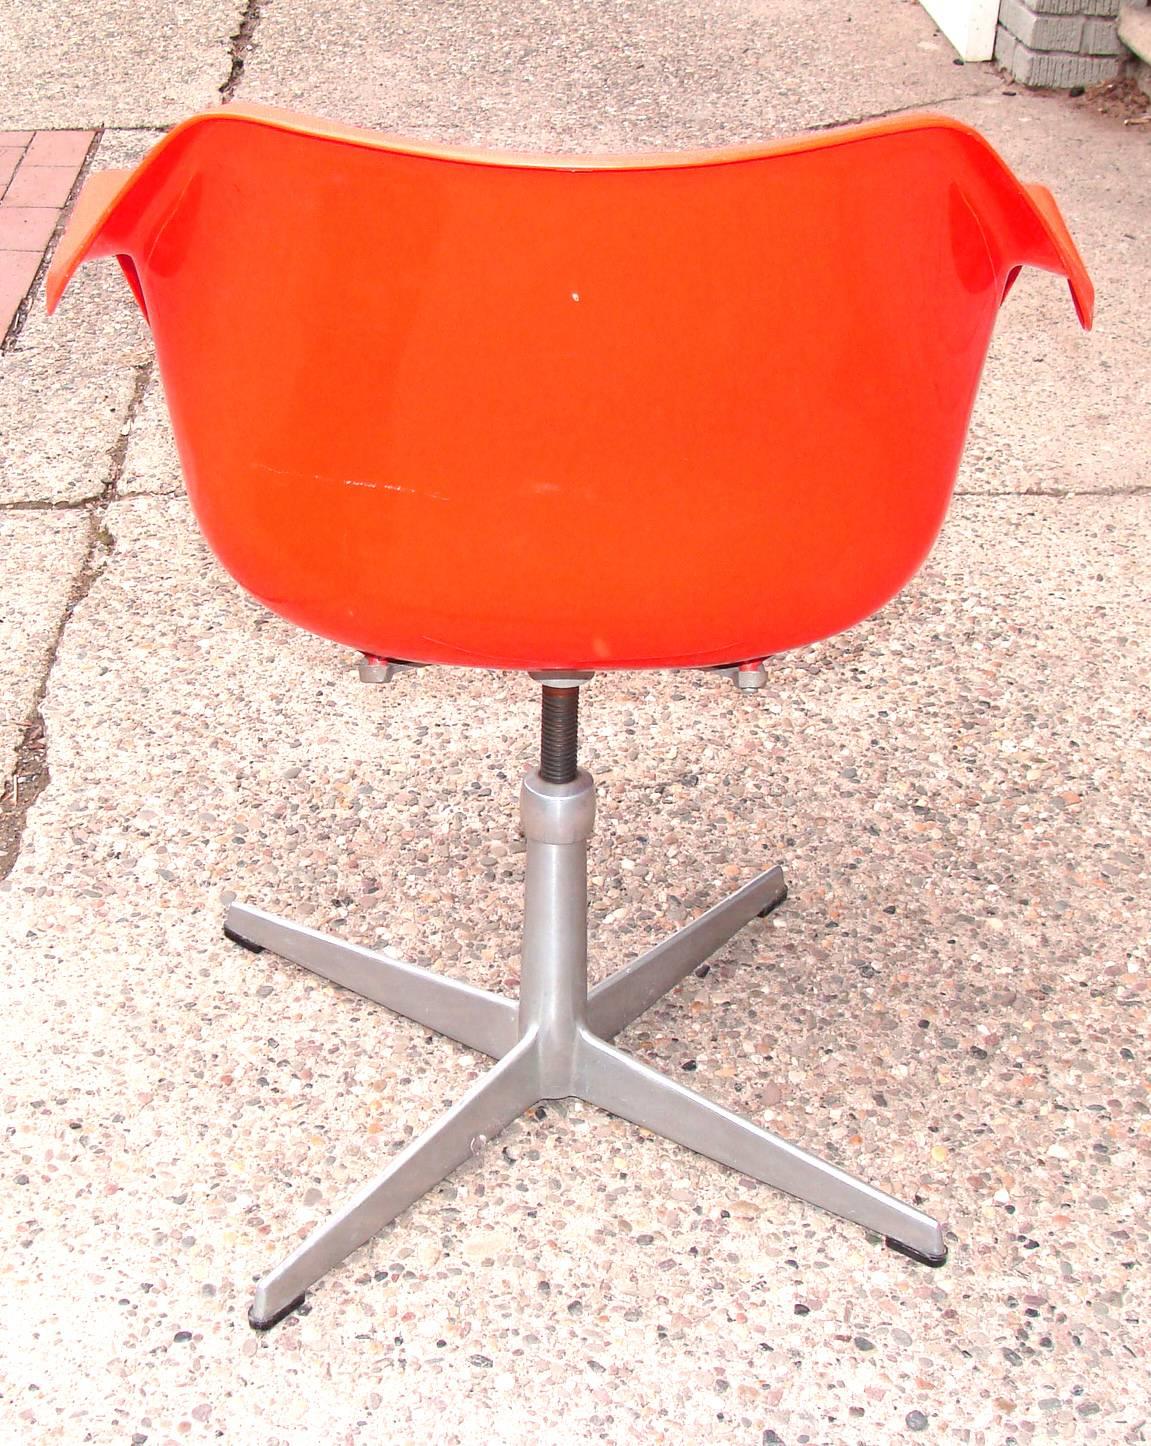 Hard - to - find swivel armchair designed by Robin Day, circa 1967. This is part of the 